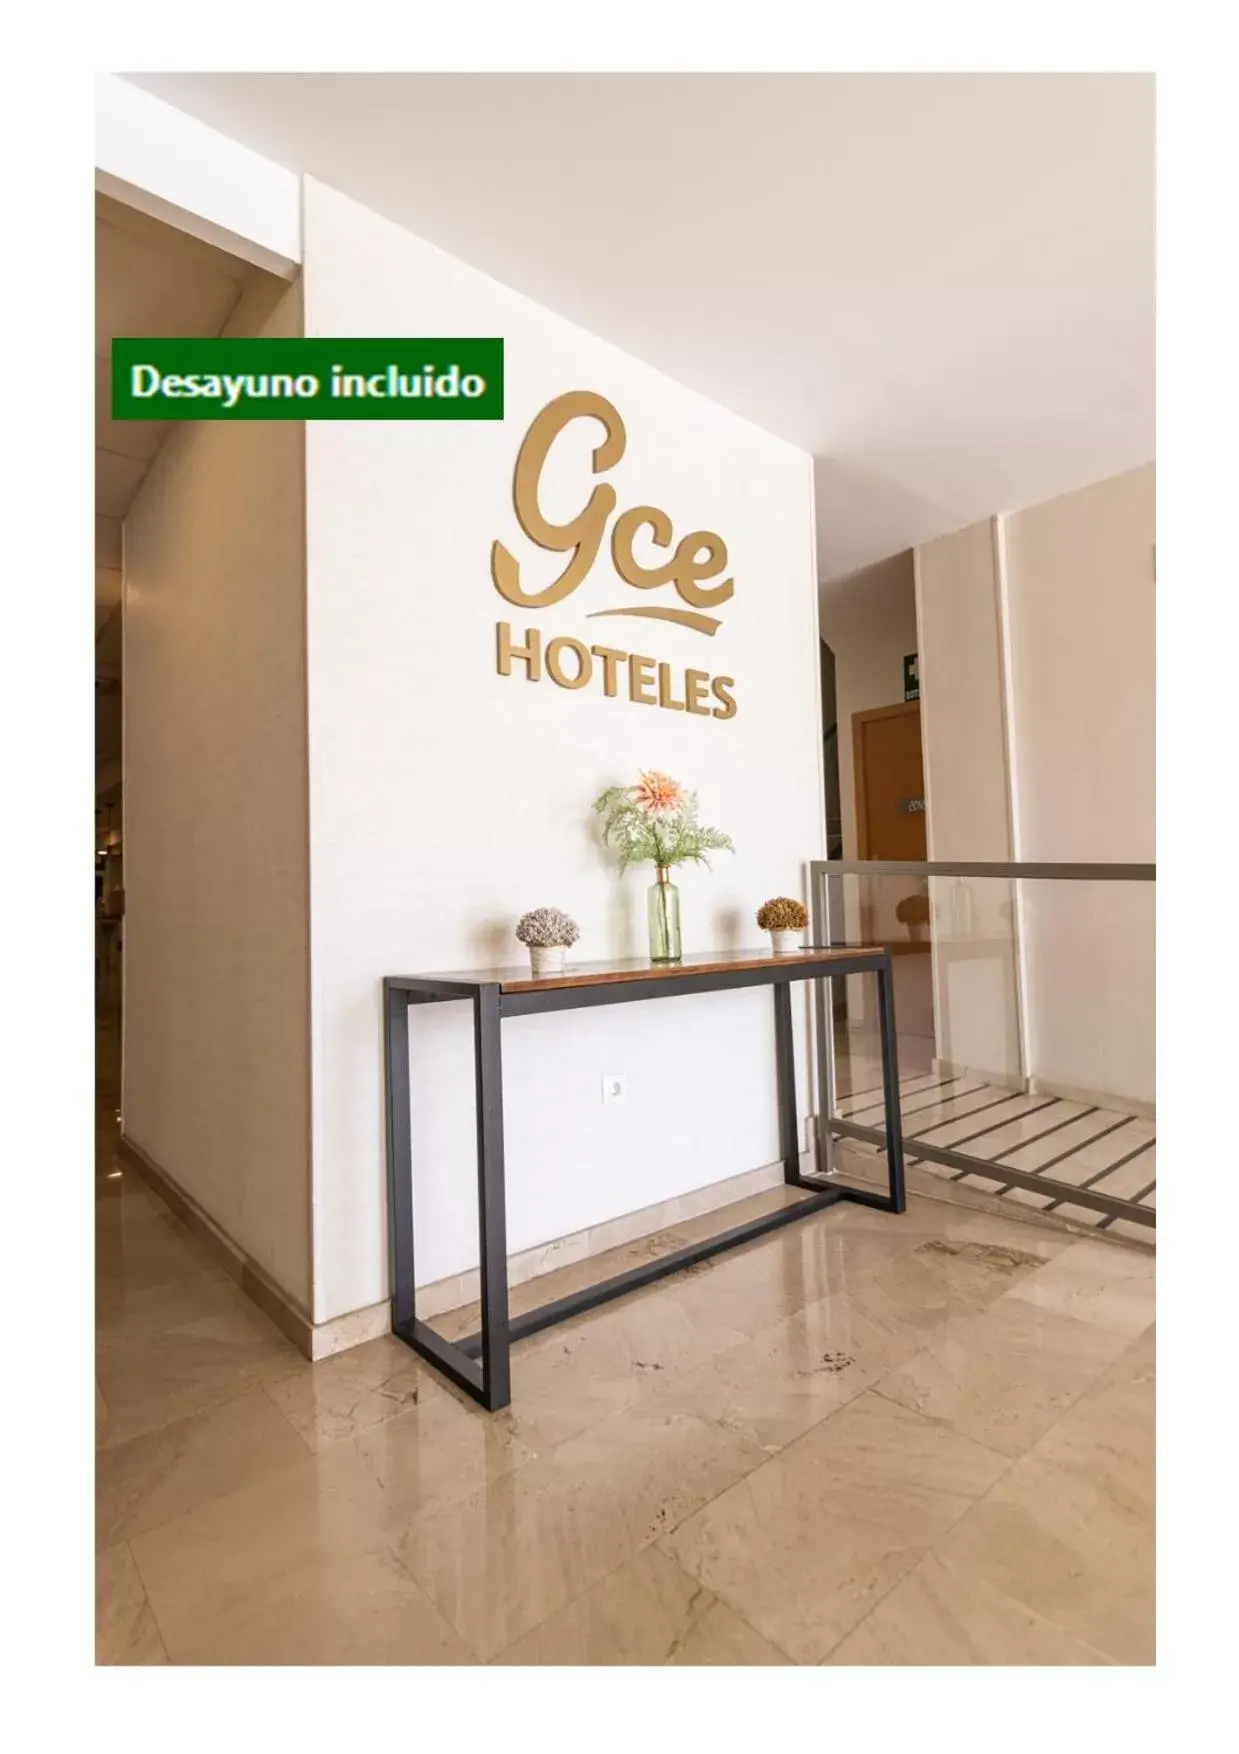 Lobby or reception in Gce Hoteles